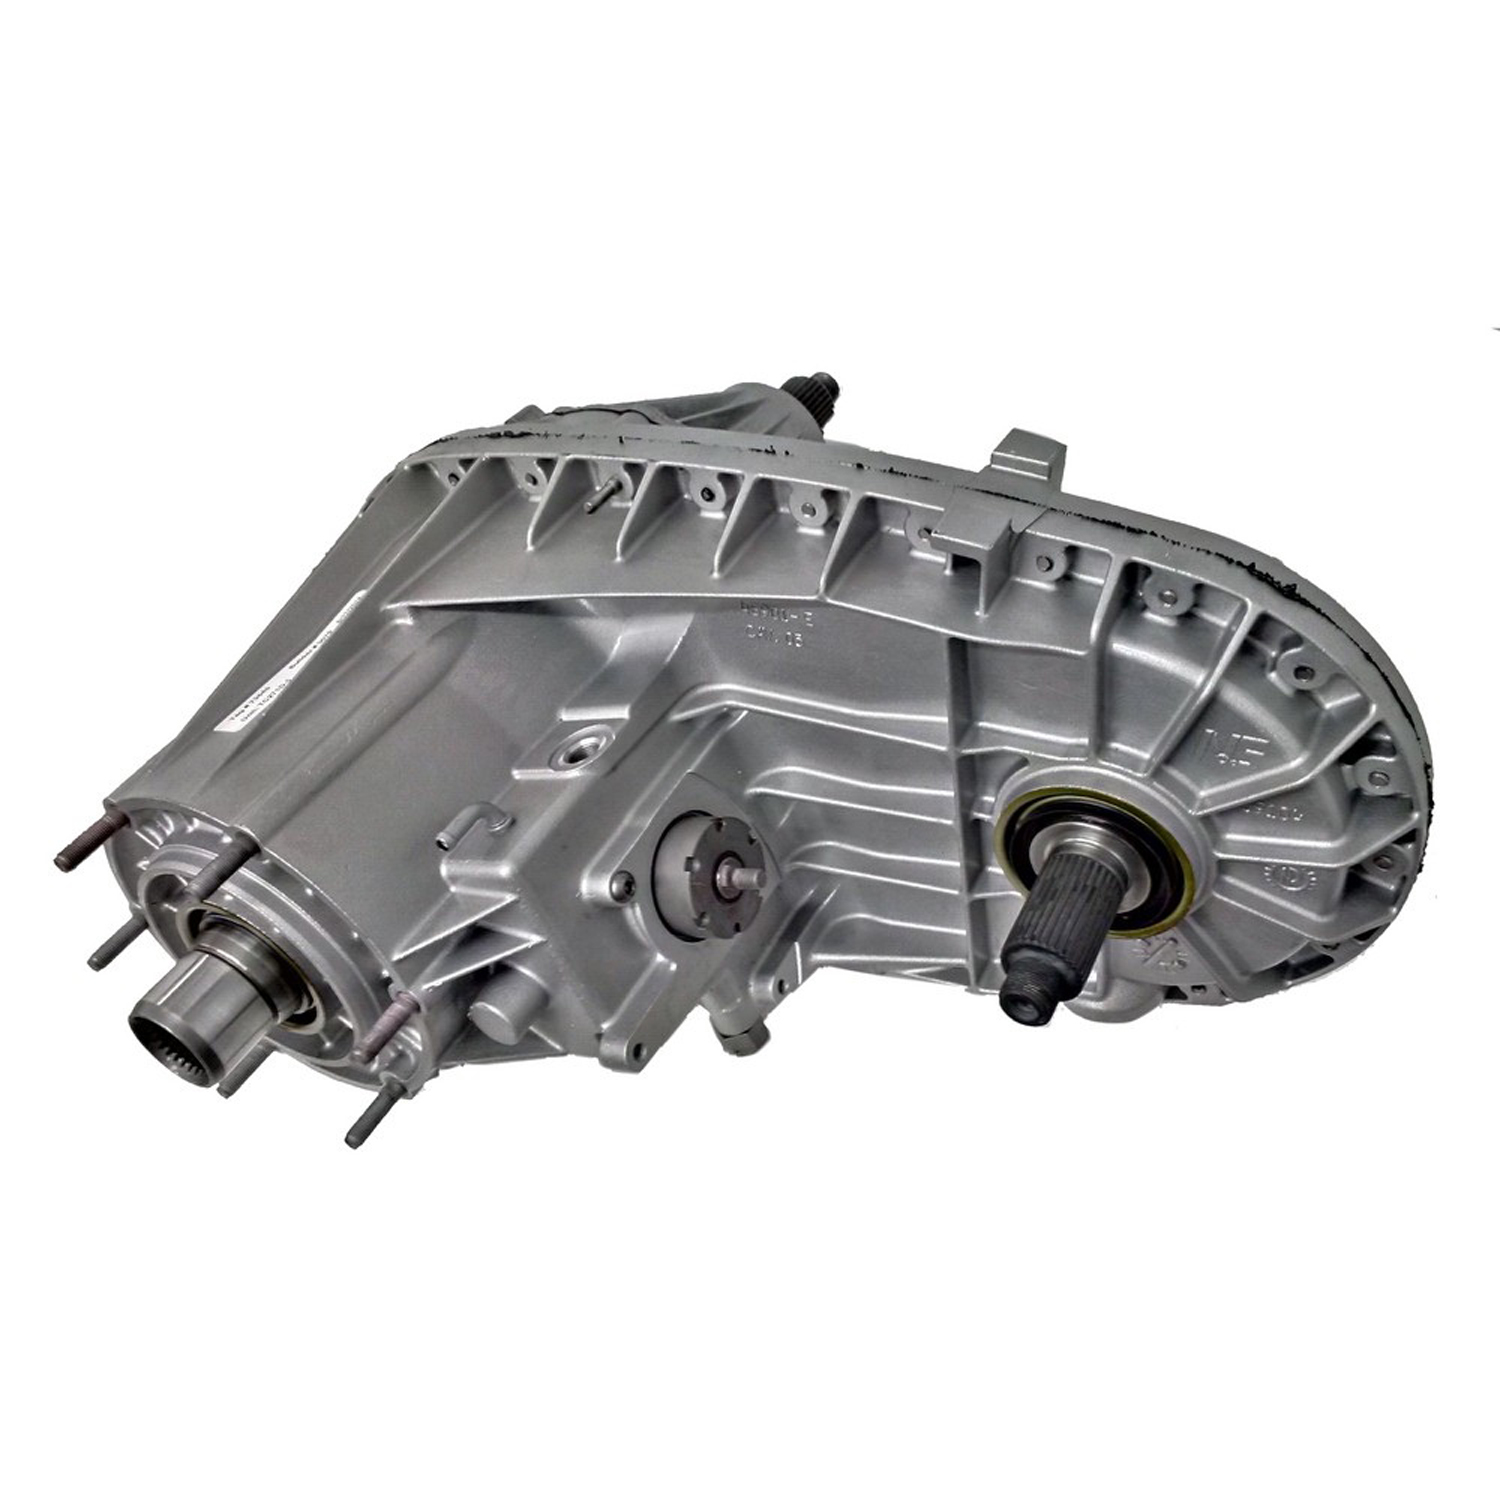 NP271 Transfer Case for Ford 99-04 F-series